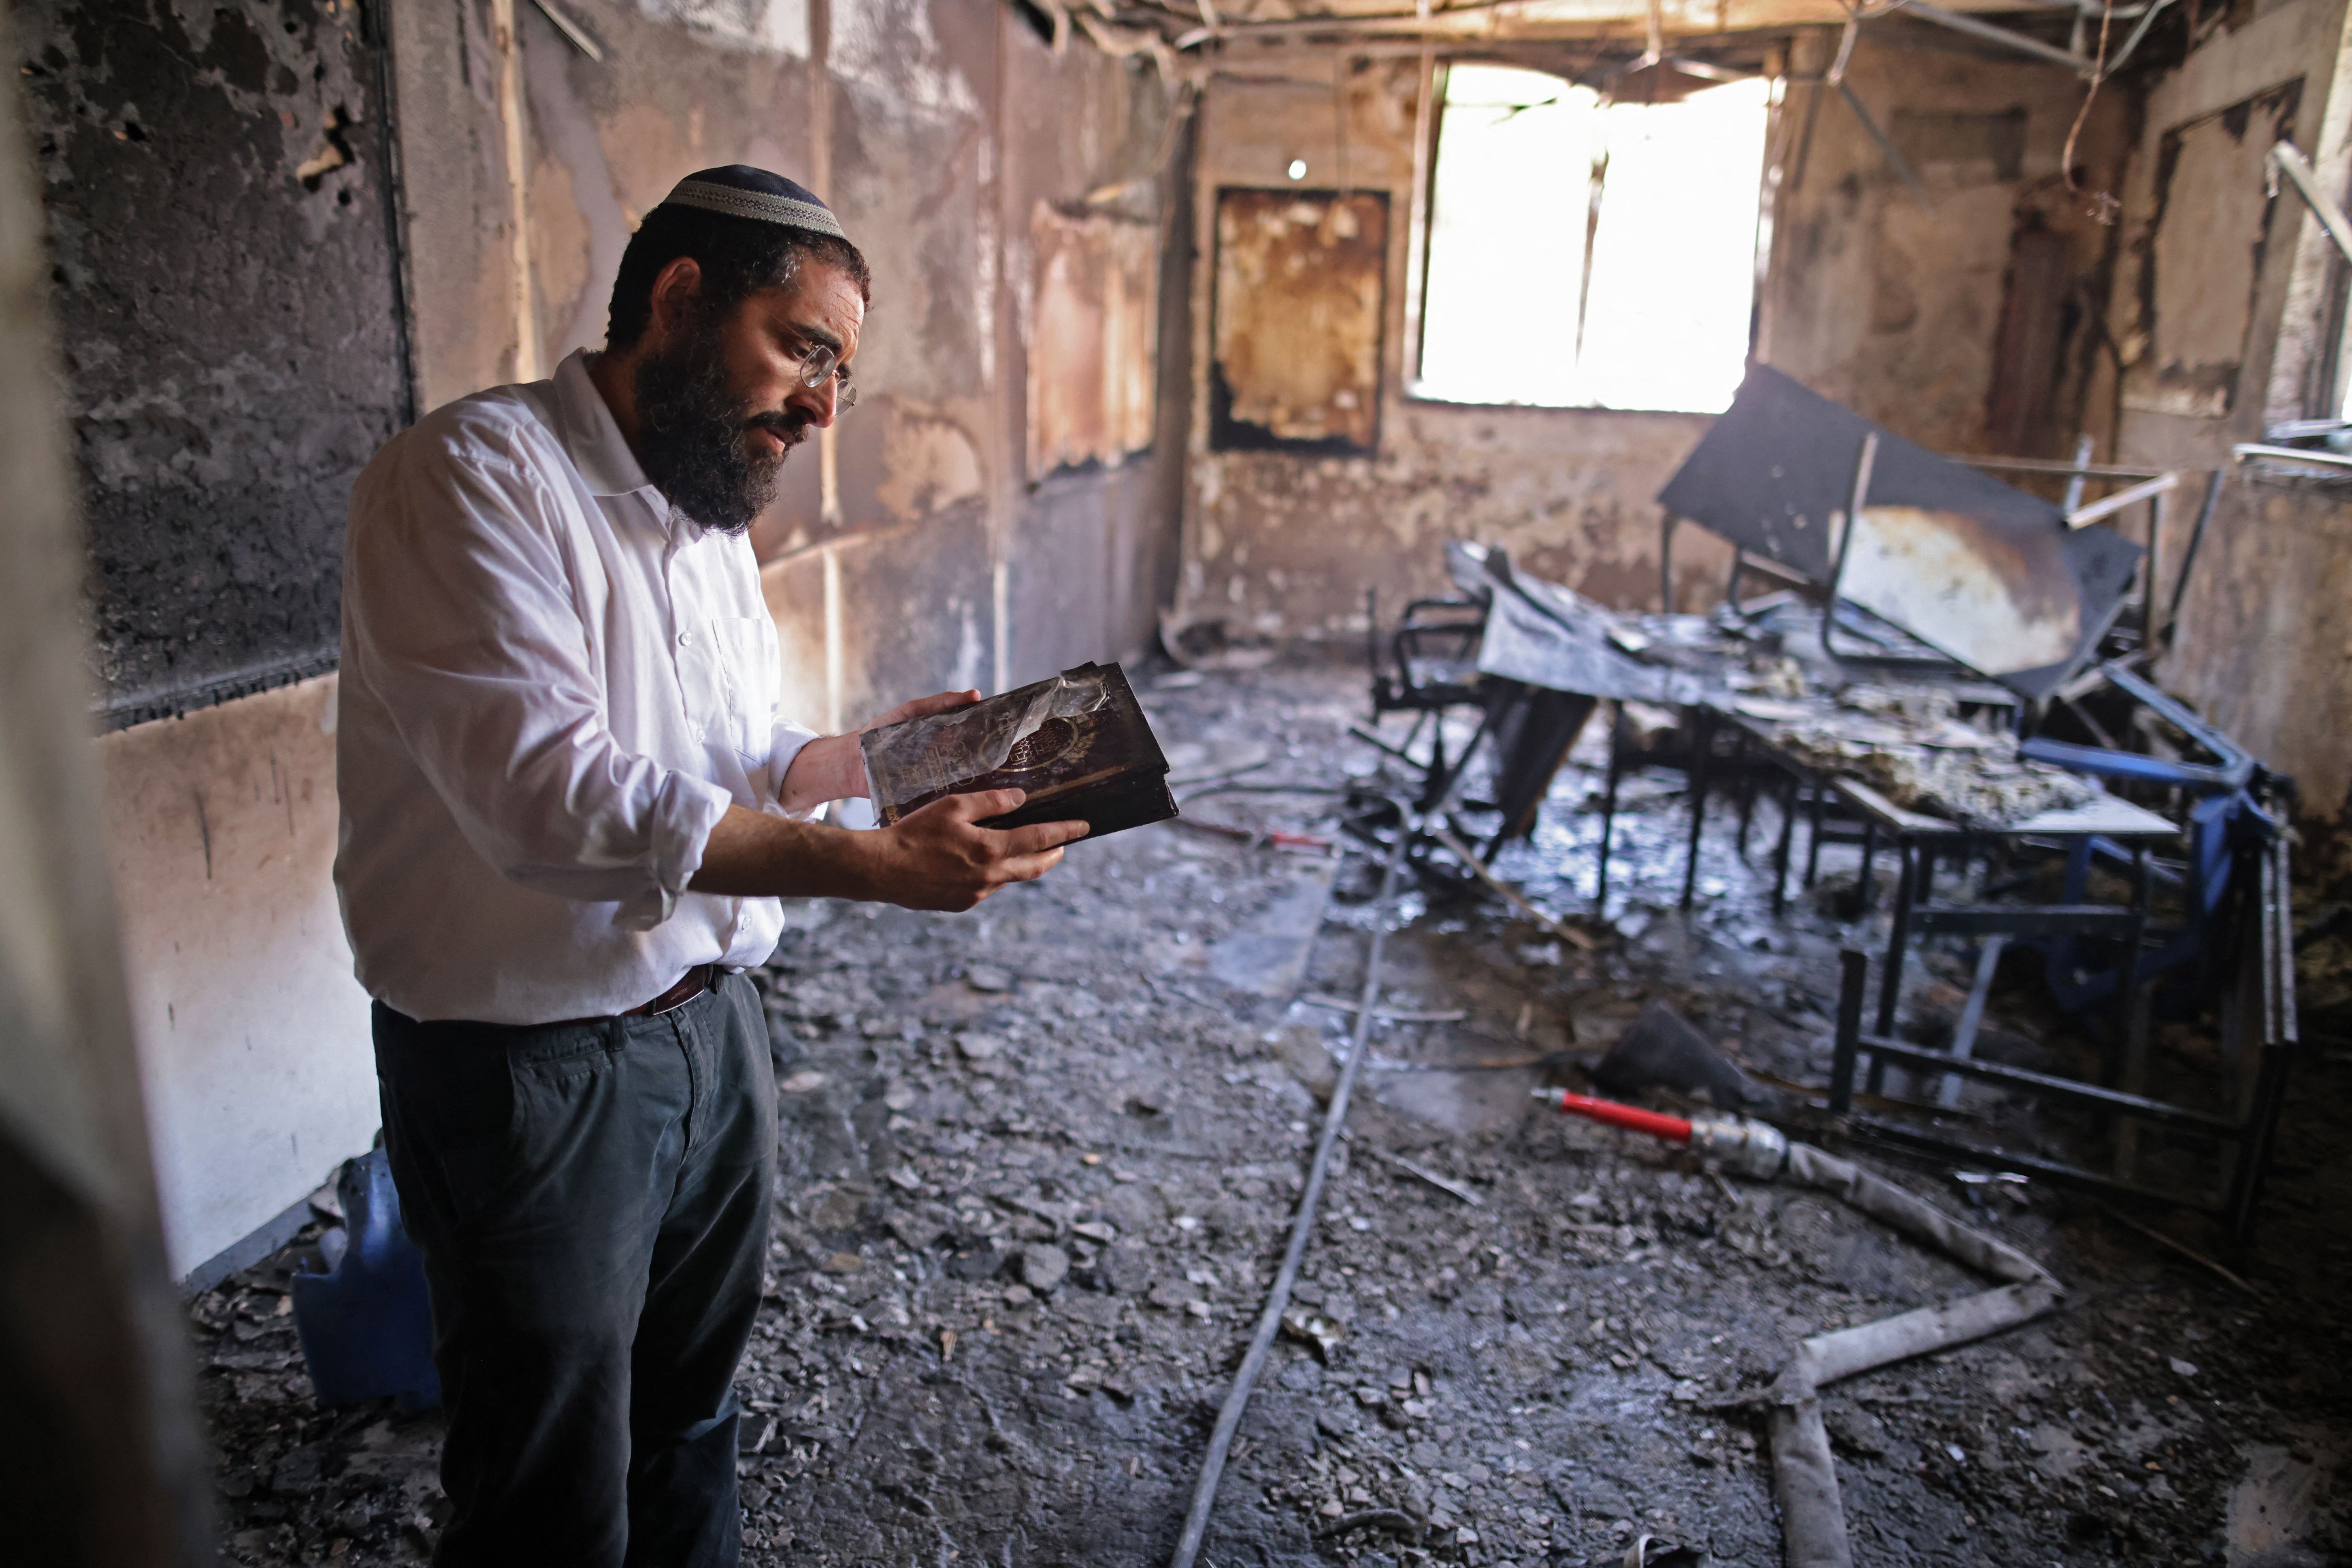 A Rabbi inspects the damage inside a torched religious school in the central Israeli city of Lod, near Tel Aviv, on May 11